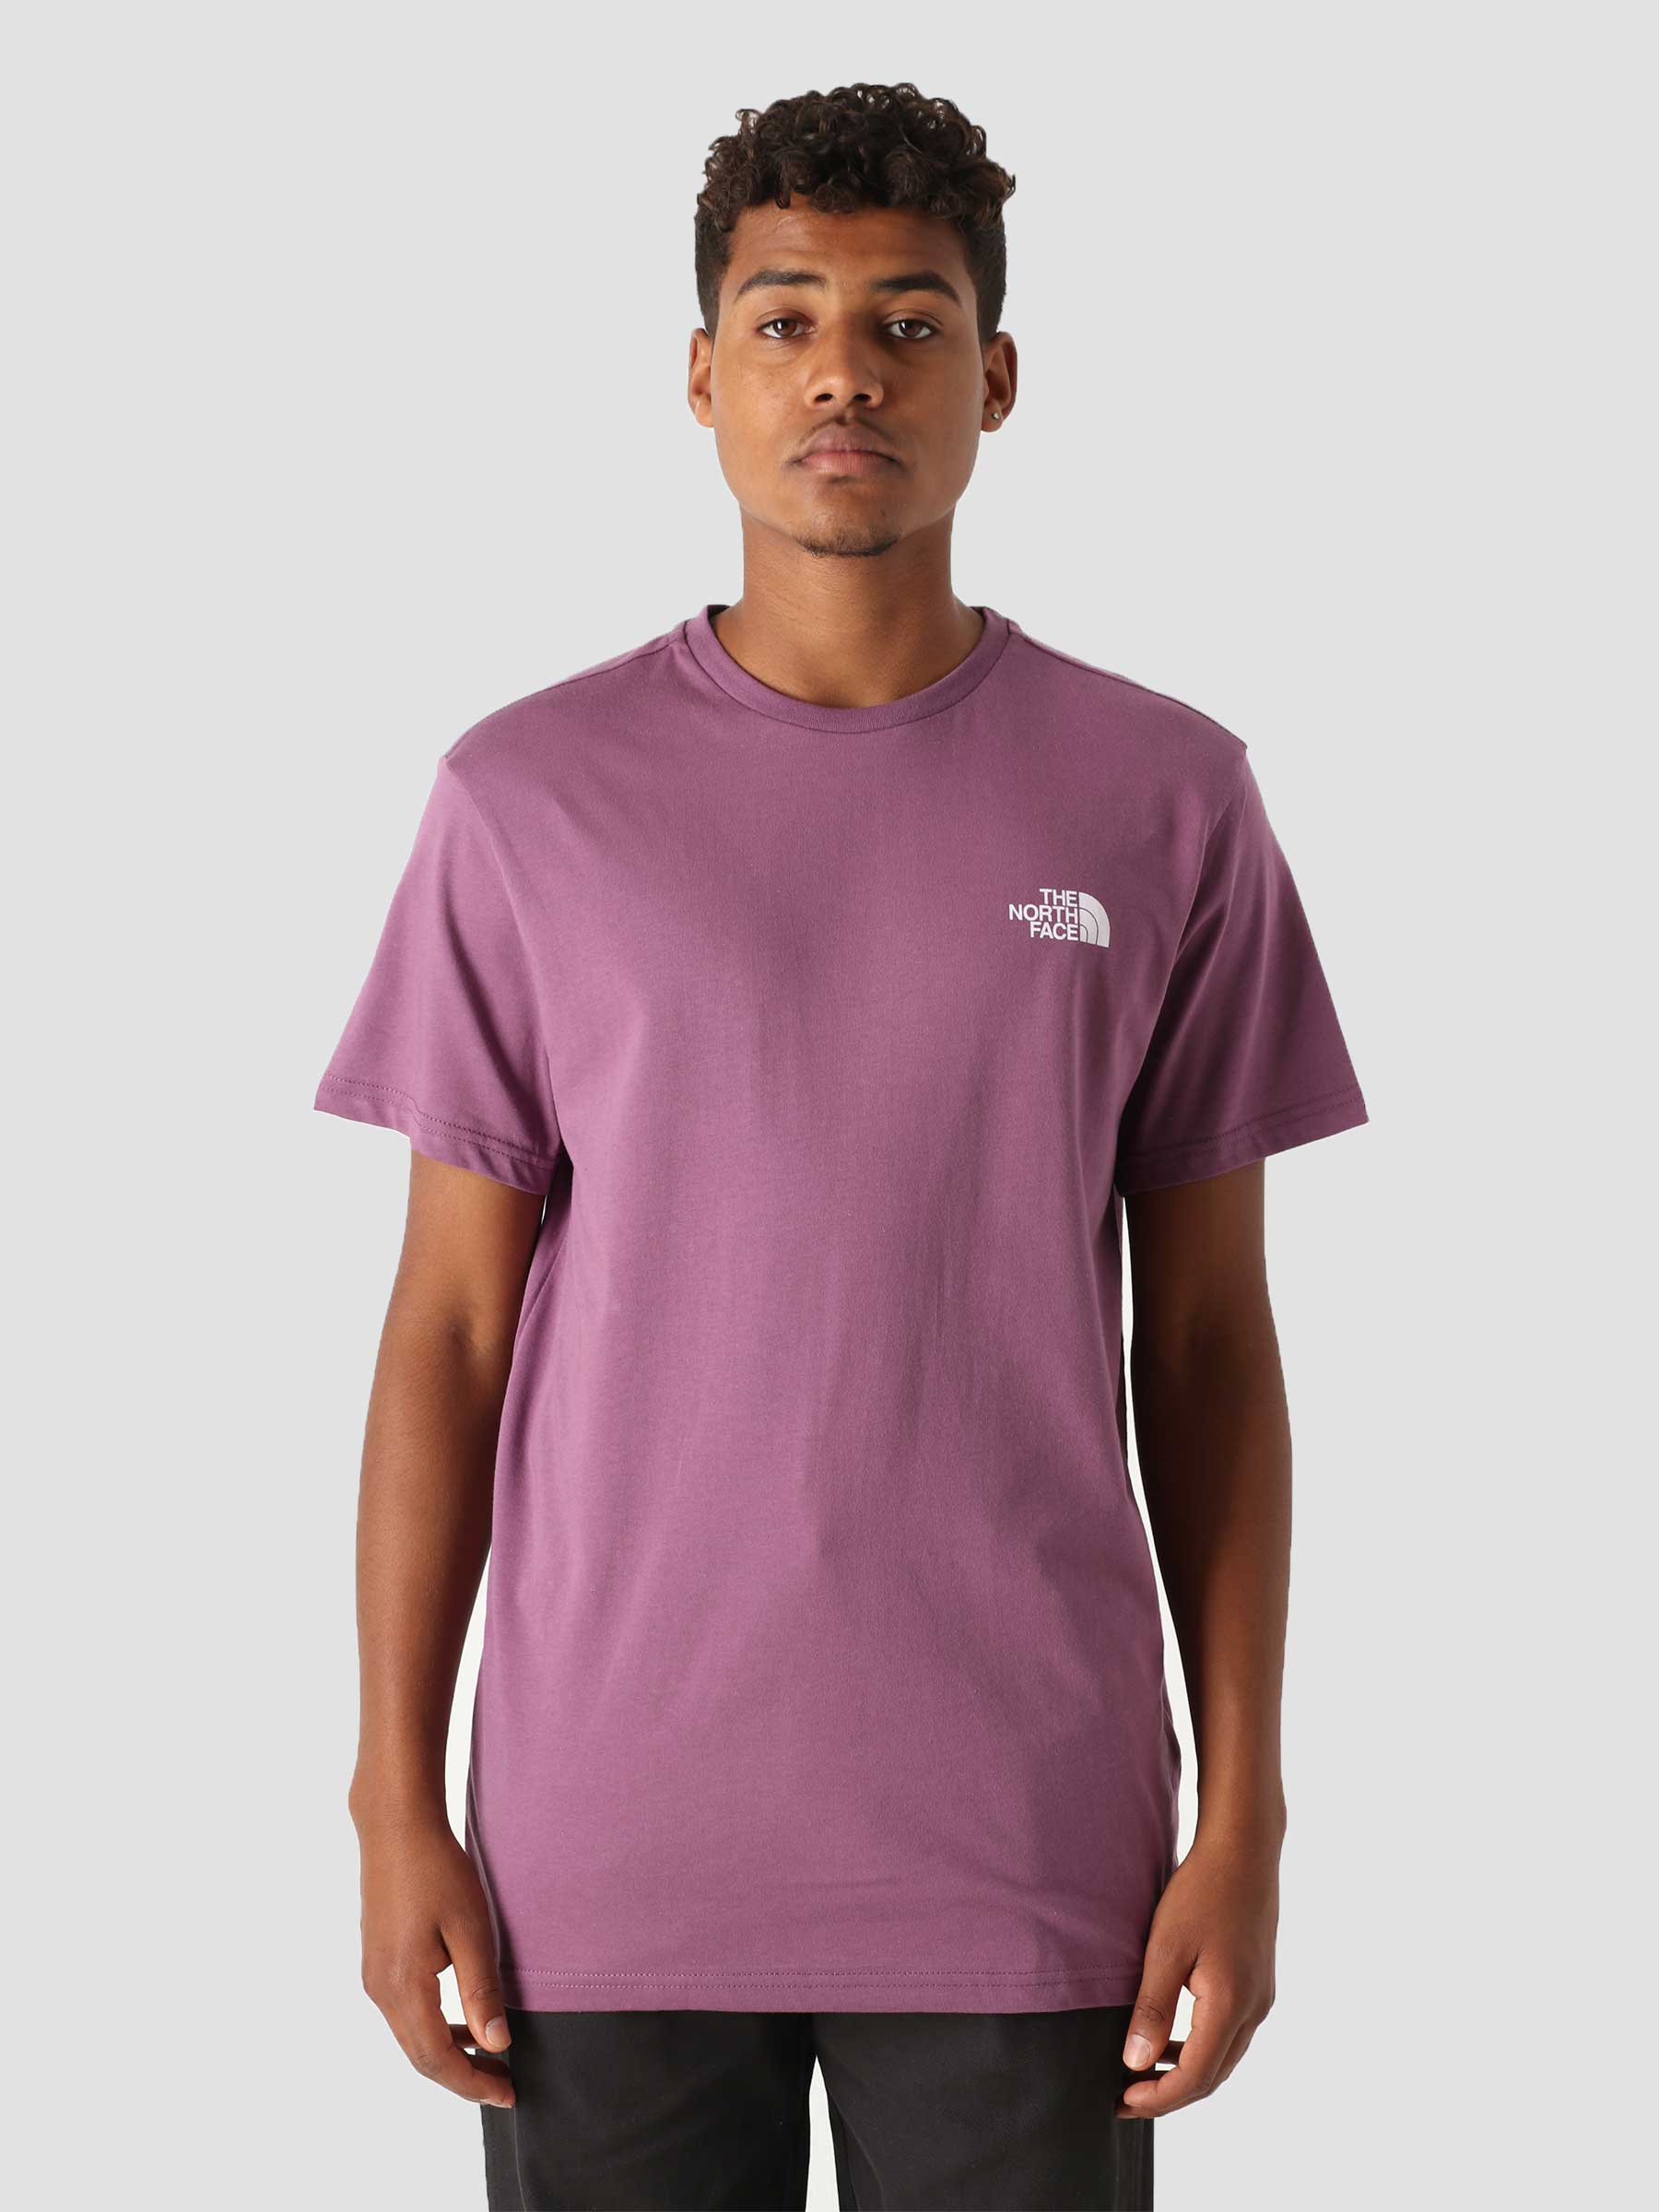 The Dome T-Shirt Simple North Face Pikes - Purple Freshcotton